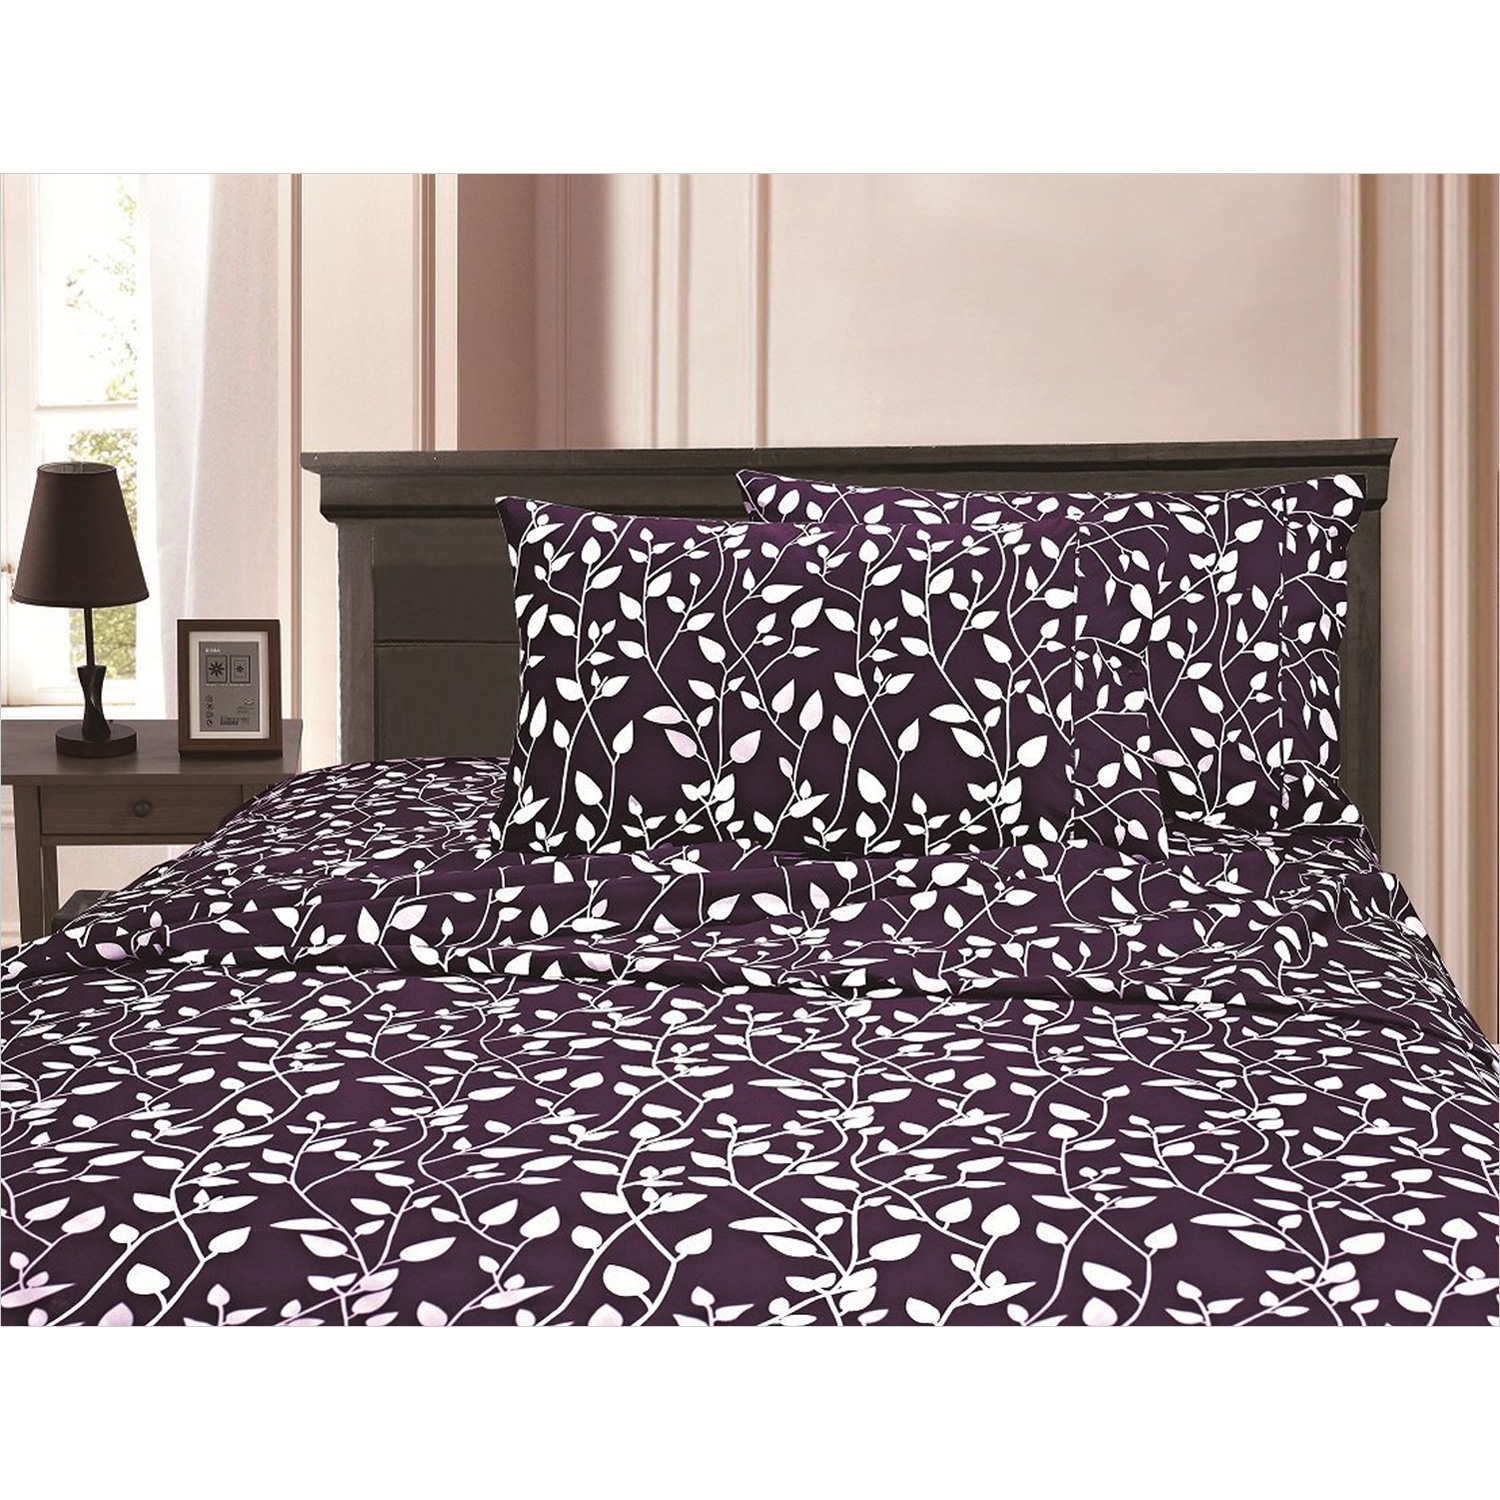 1500 Series Brushed Luxury Wrinkle And Fade Resistant Bedding Sheets